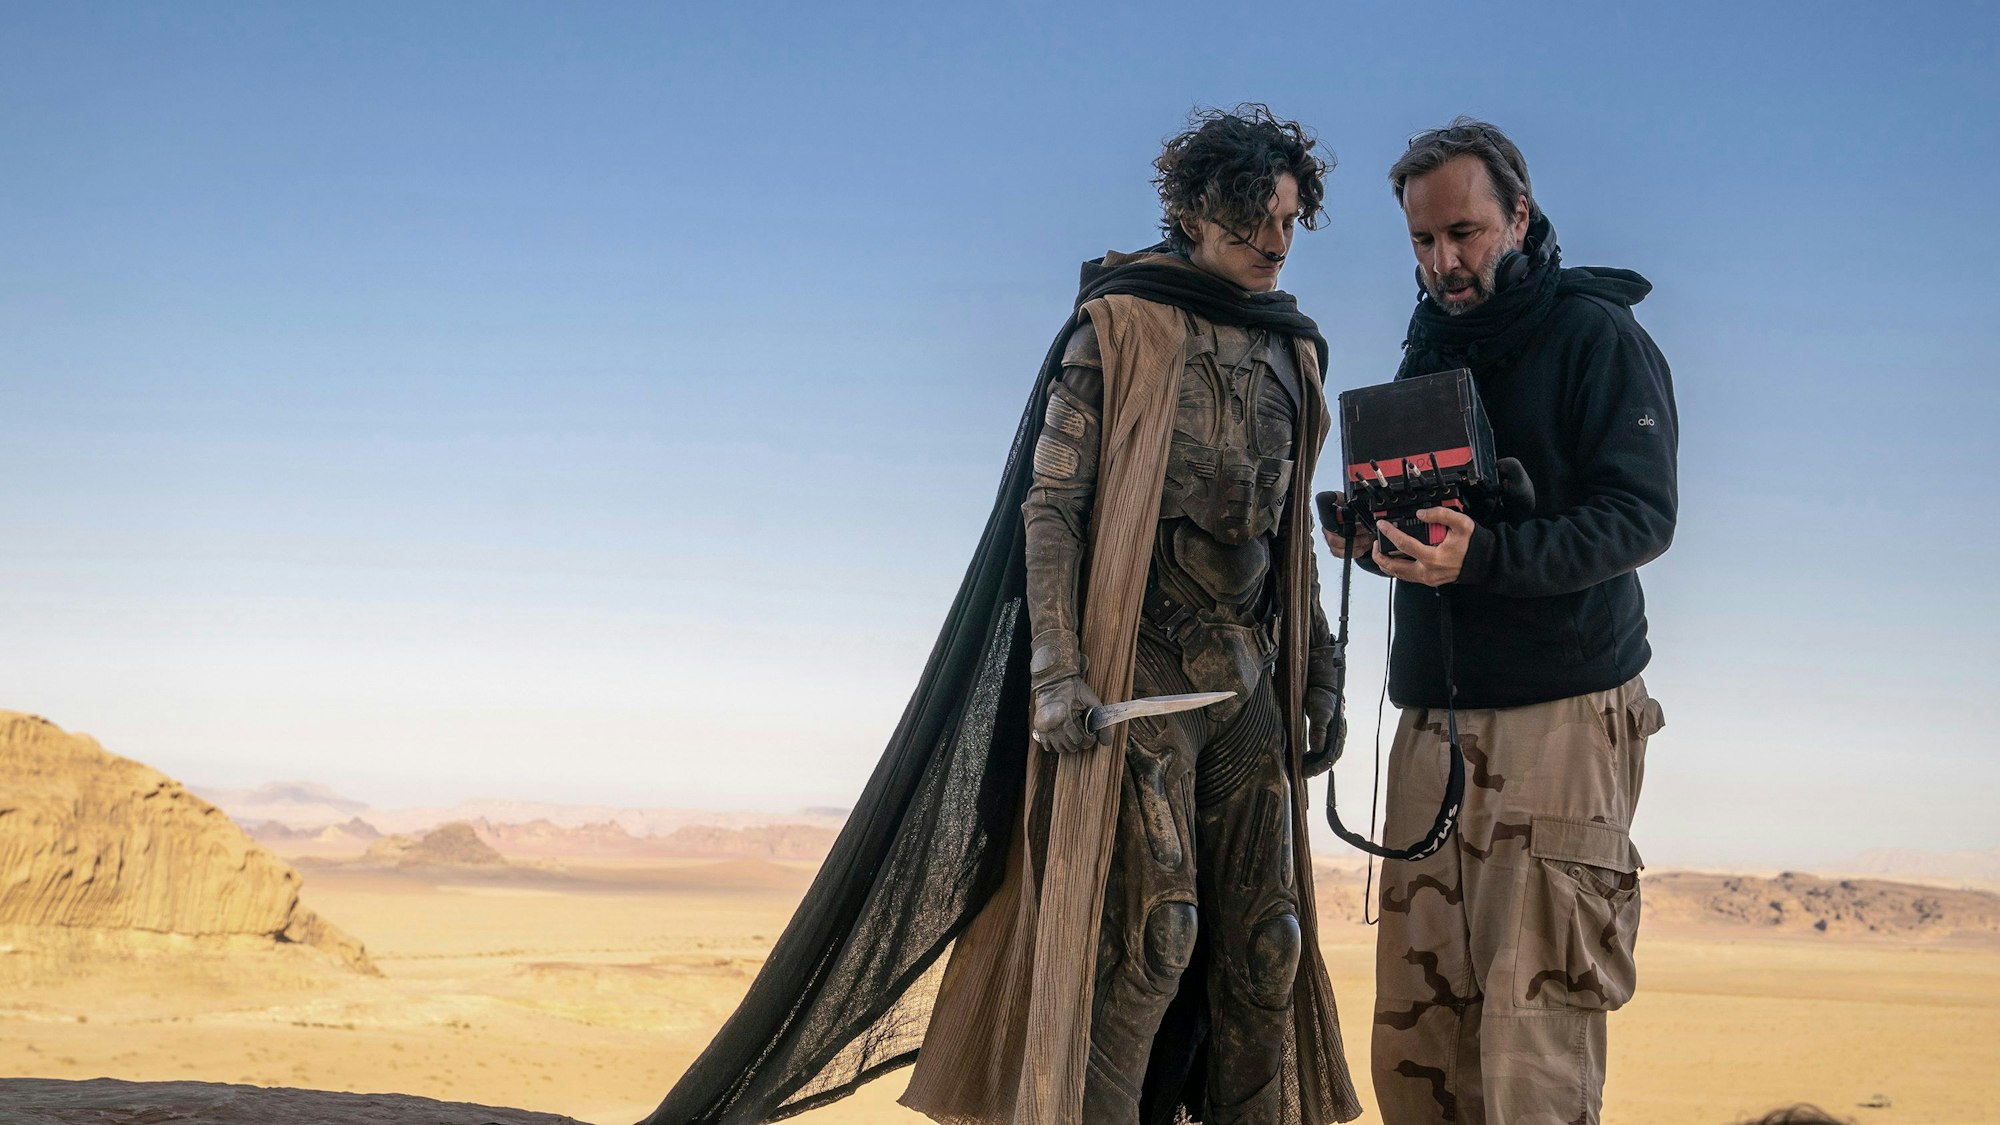 This image released by Warner Bros. Pictures shows director Denis Villeneuve, right, with actor Timothee Chalamet on the set of "Dune: Part Two." (Niko Tavernise/Warner Bros. Pictures via AP)